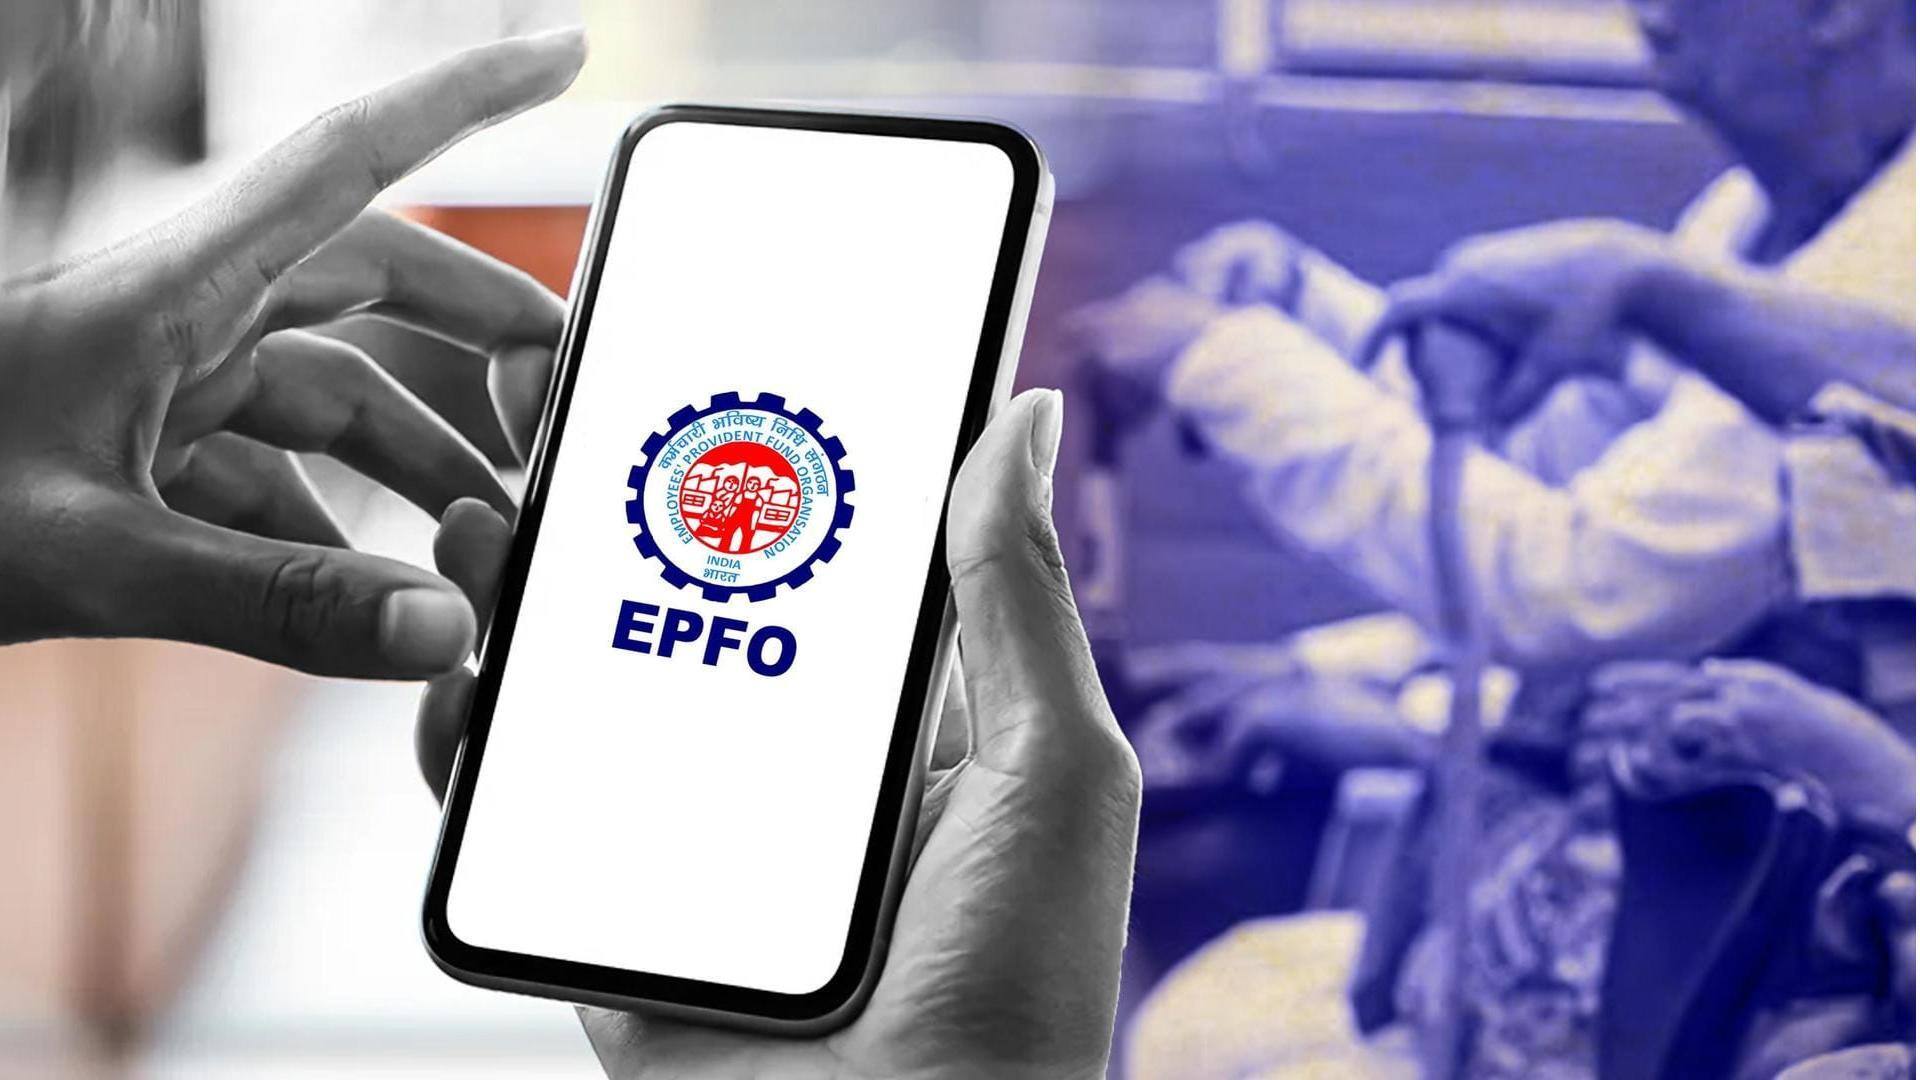 EPFO fixes 8.15% interest rate on Employees' Provident Fund